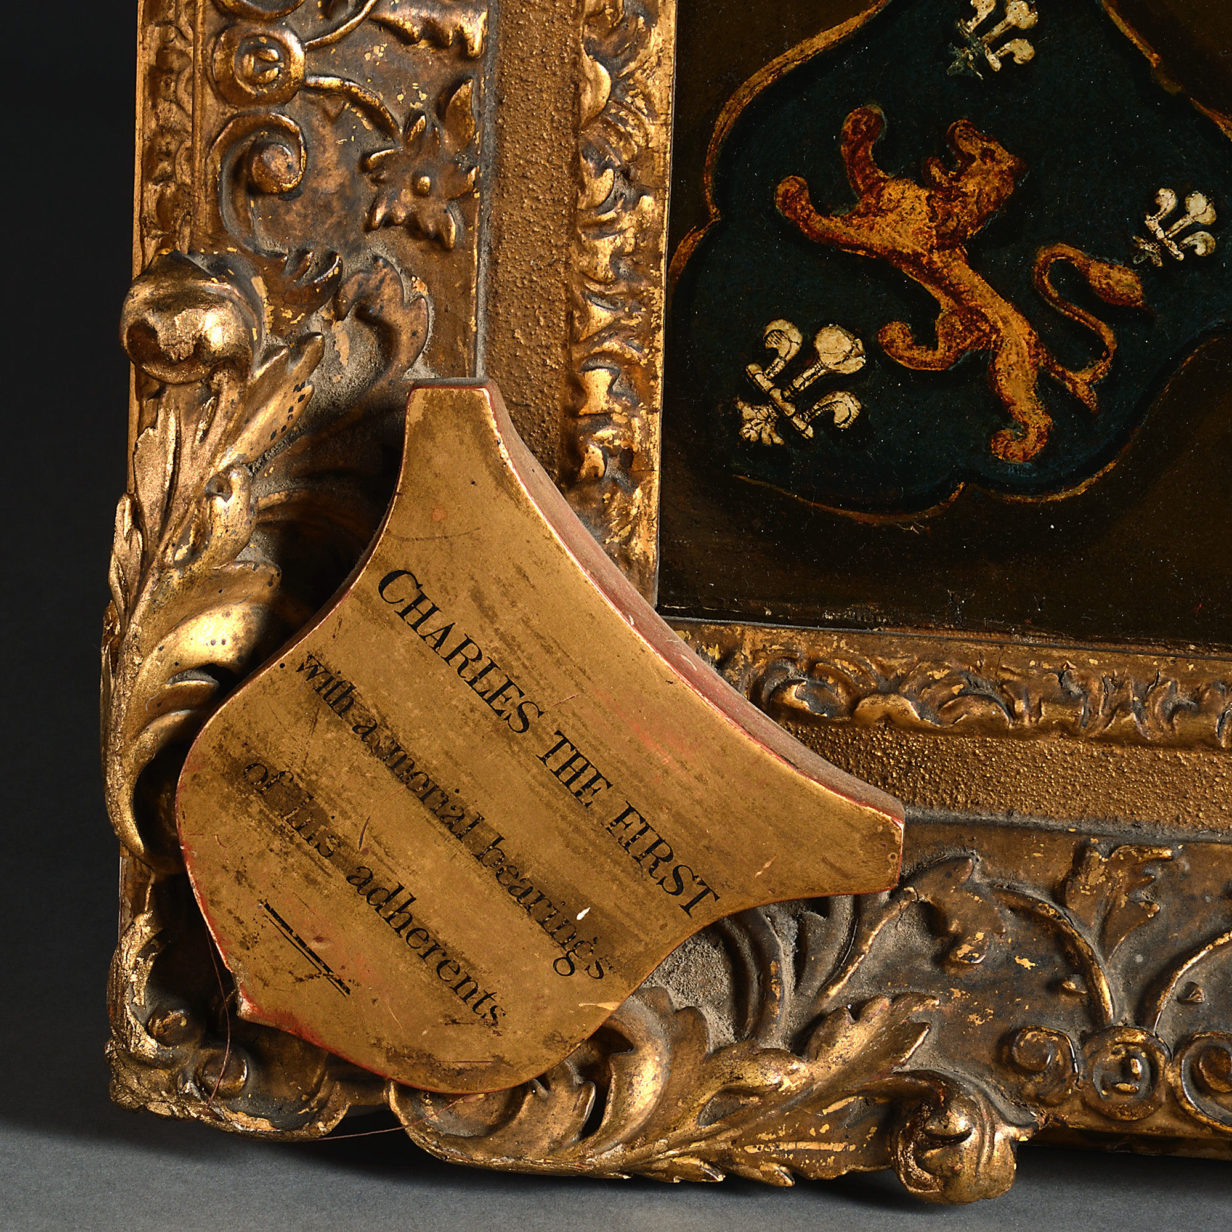 A rare 18th century portrait hatchment of charles i and his adherents